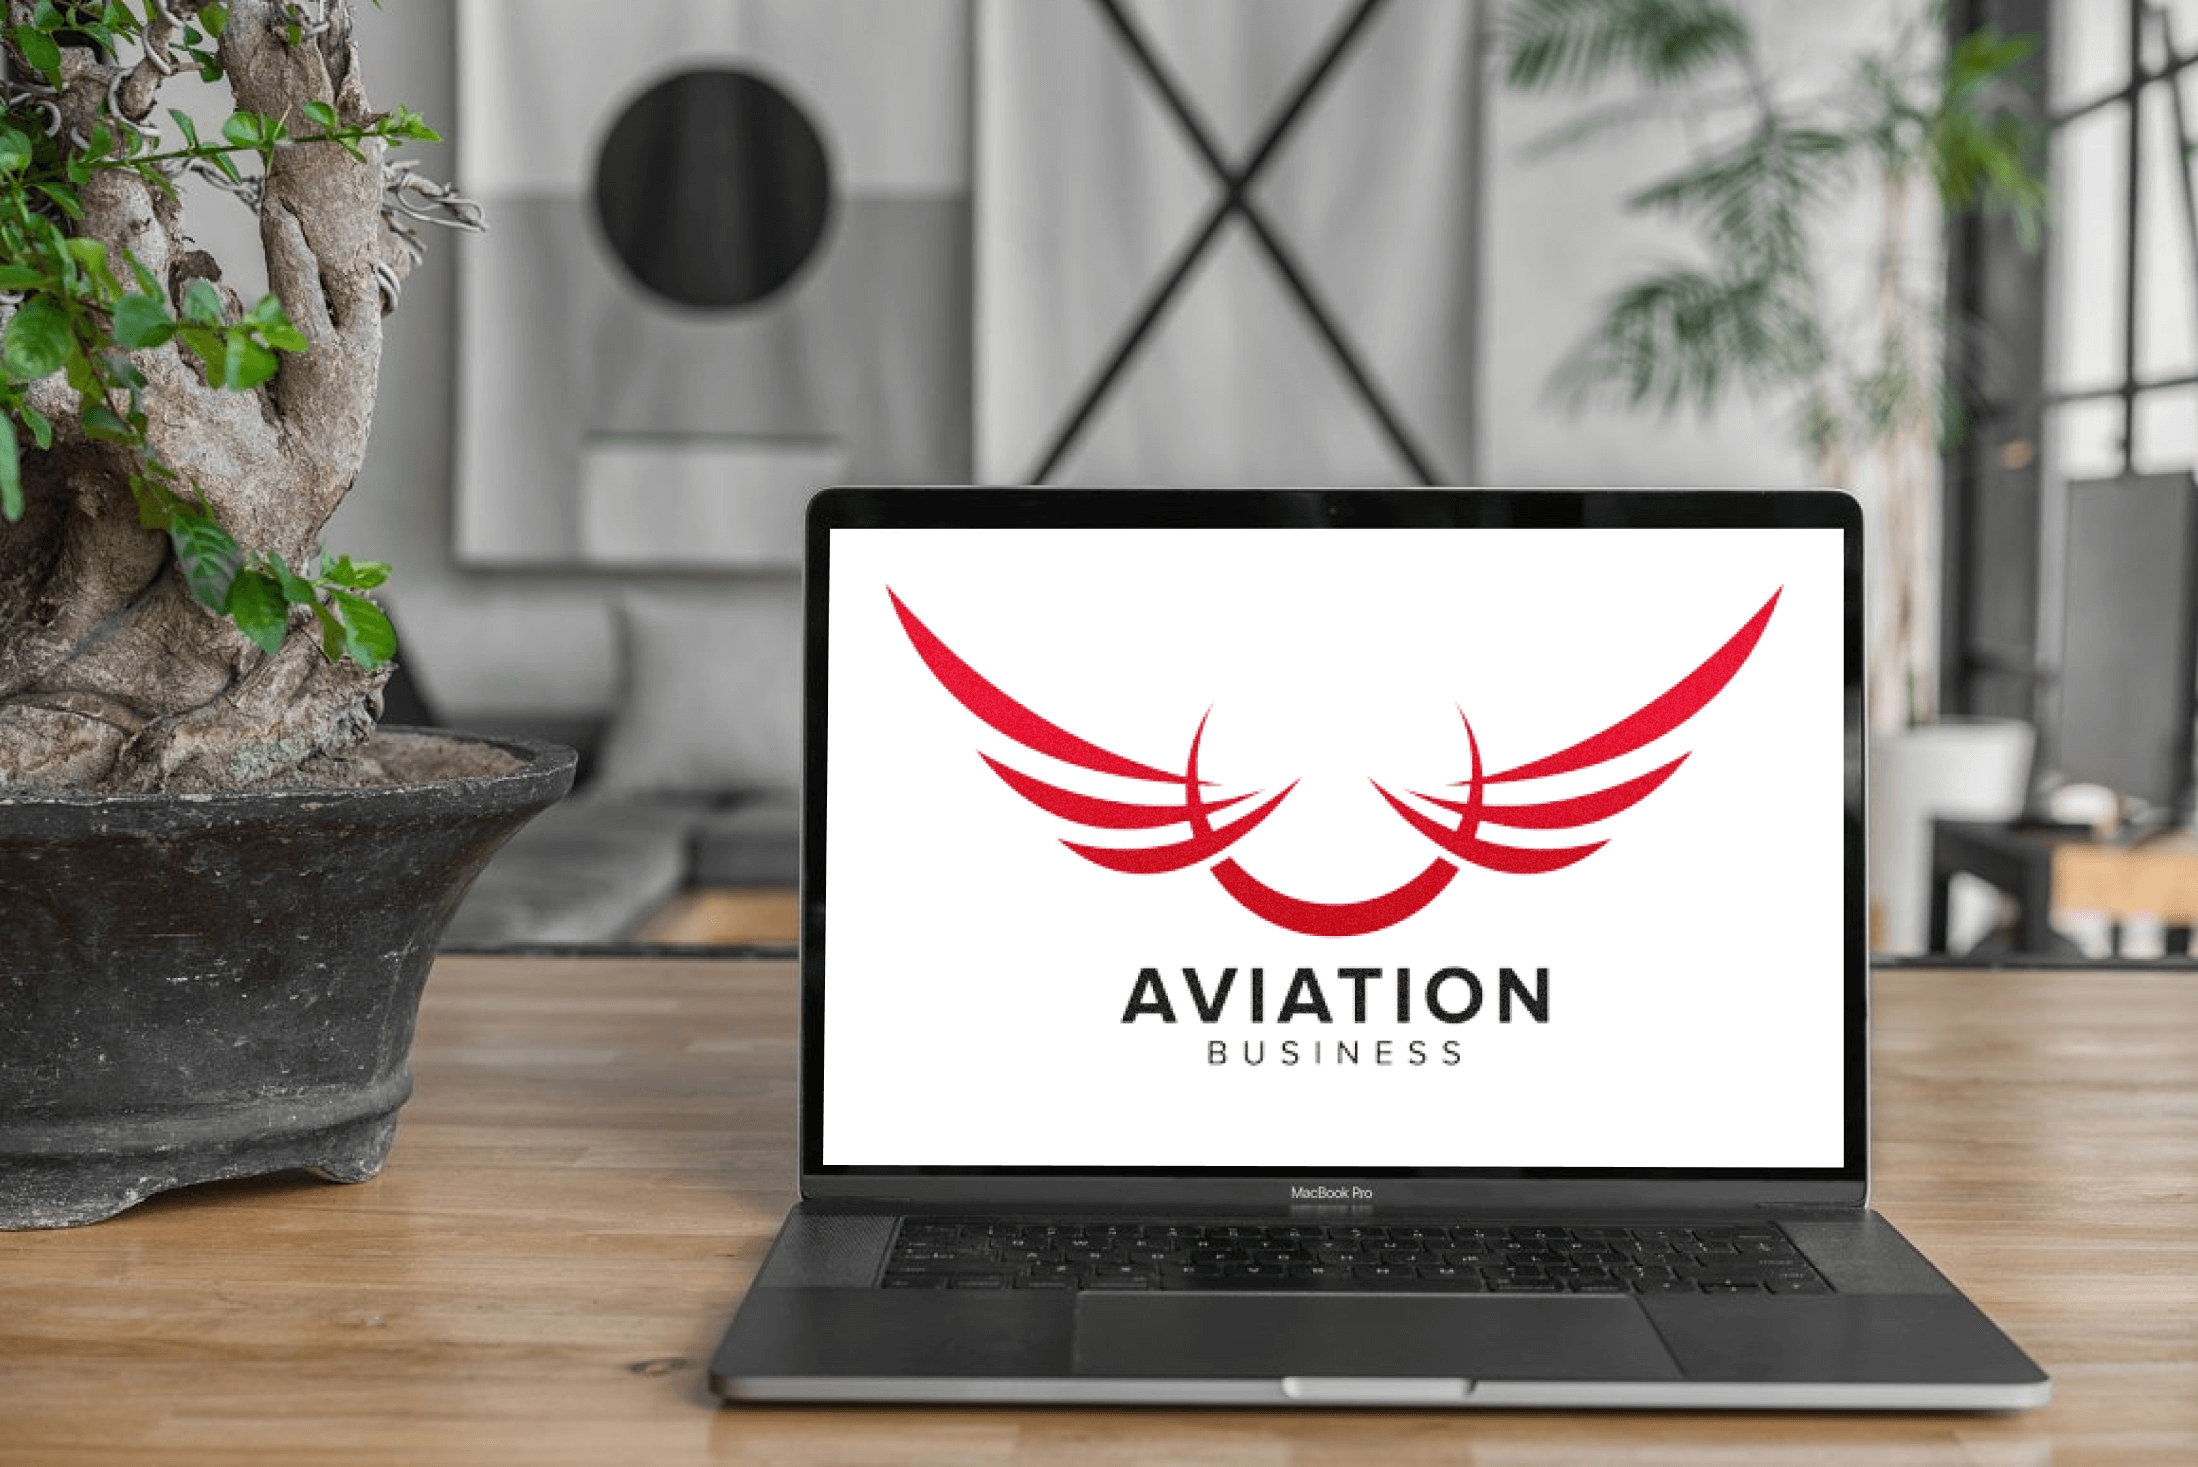 Wing airlines concept design on laptop.